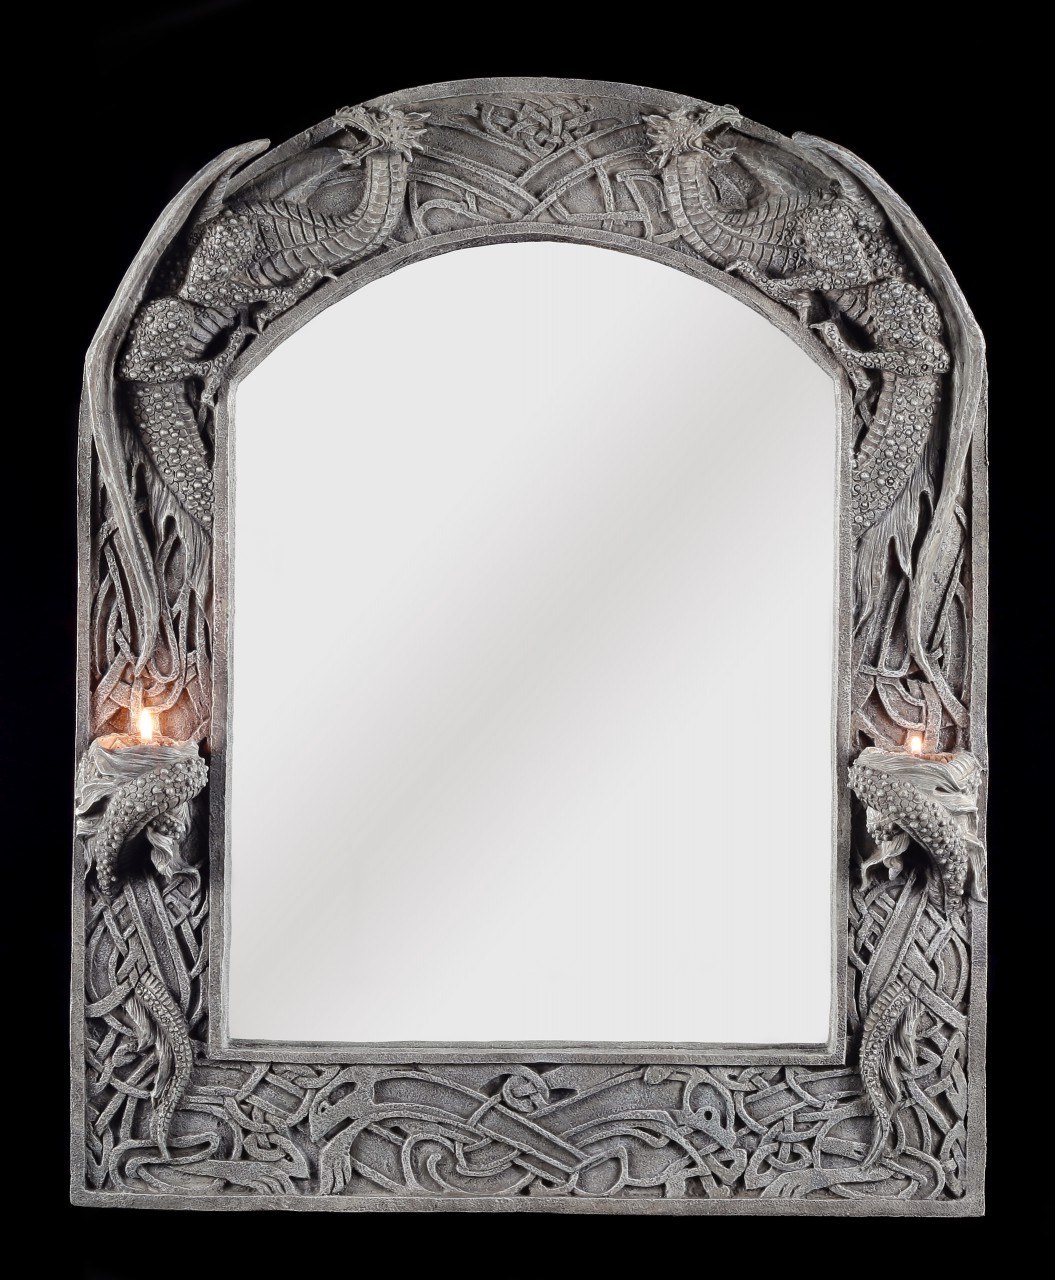 Dragon Mirror with Tealight or Candle Holder